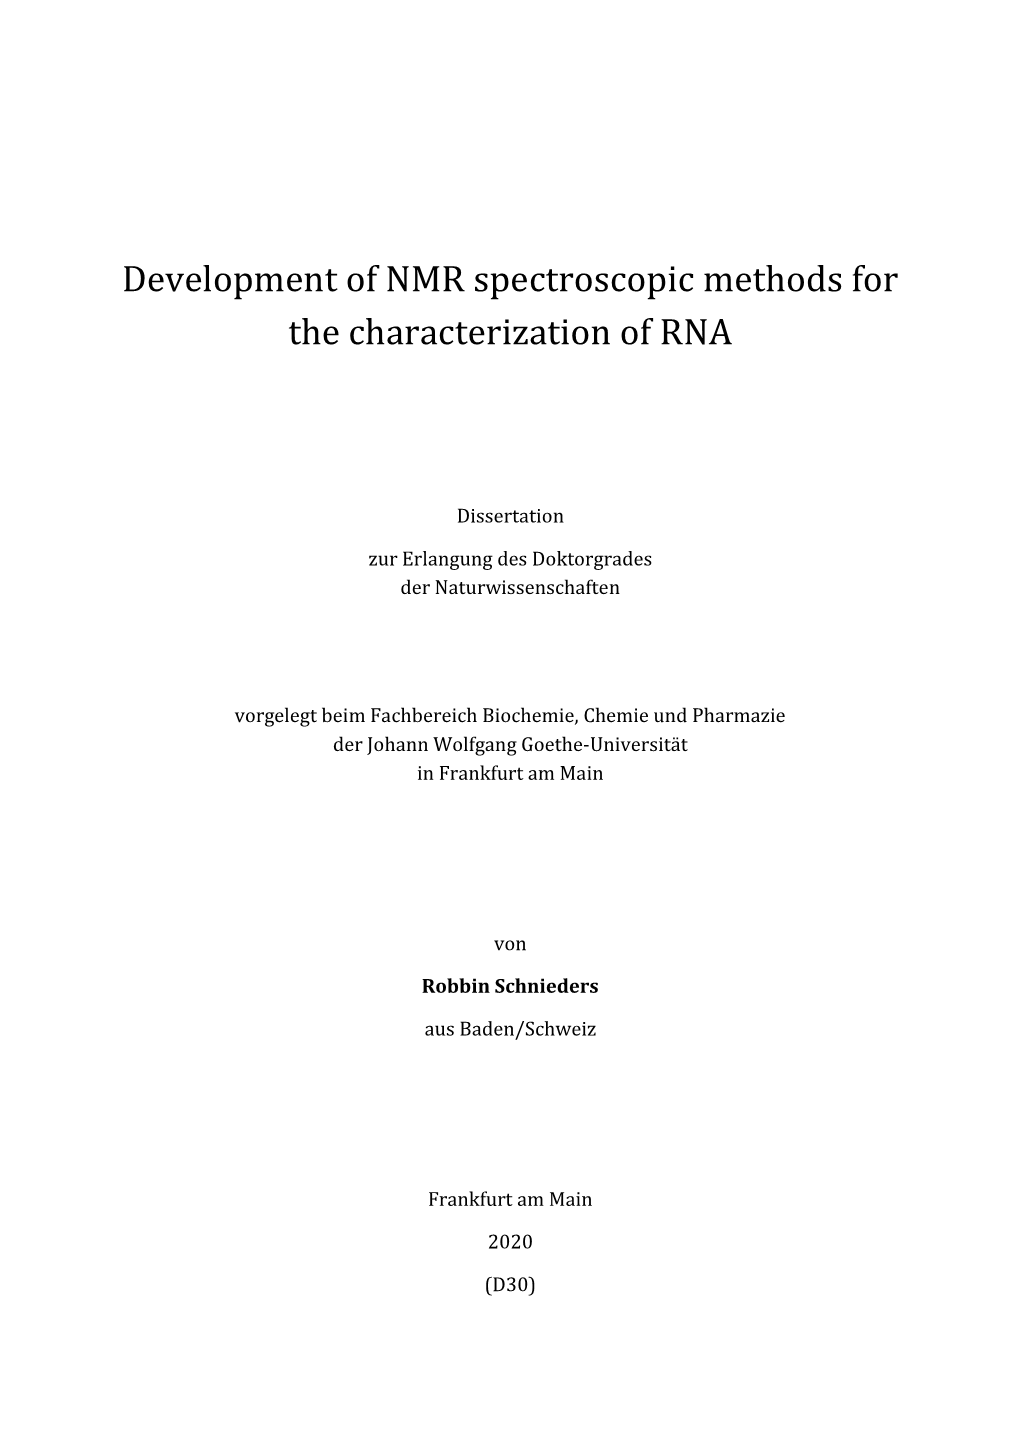 Development of NMR Spectroscopic Methods for the Characterization of RNA